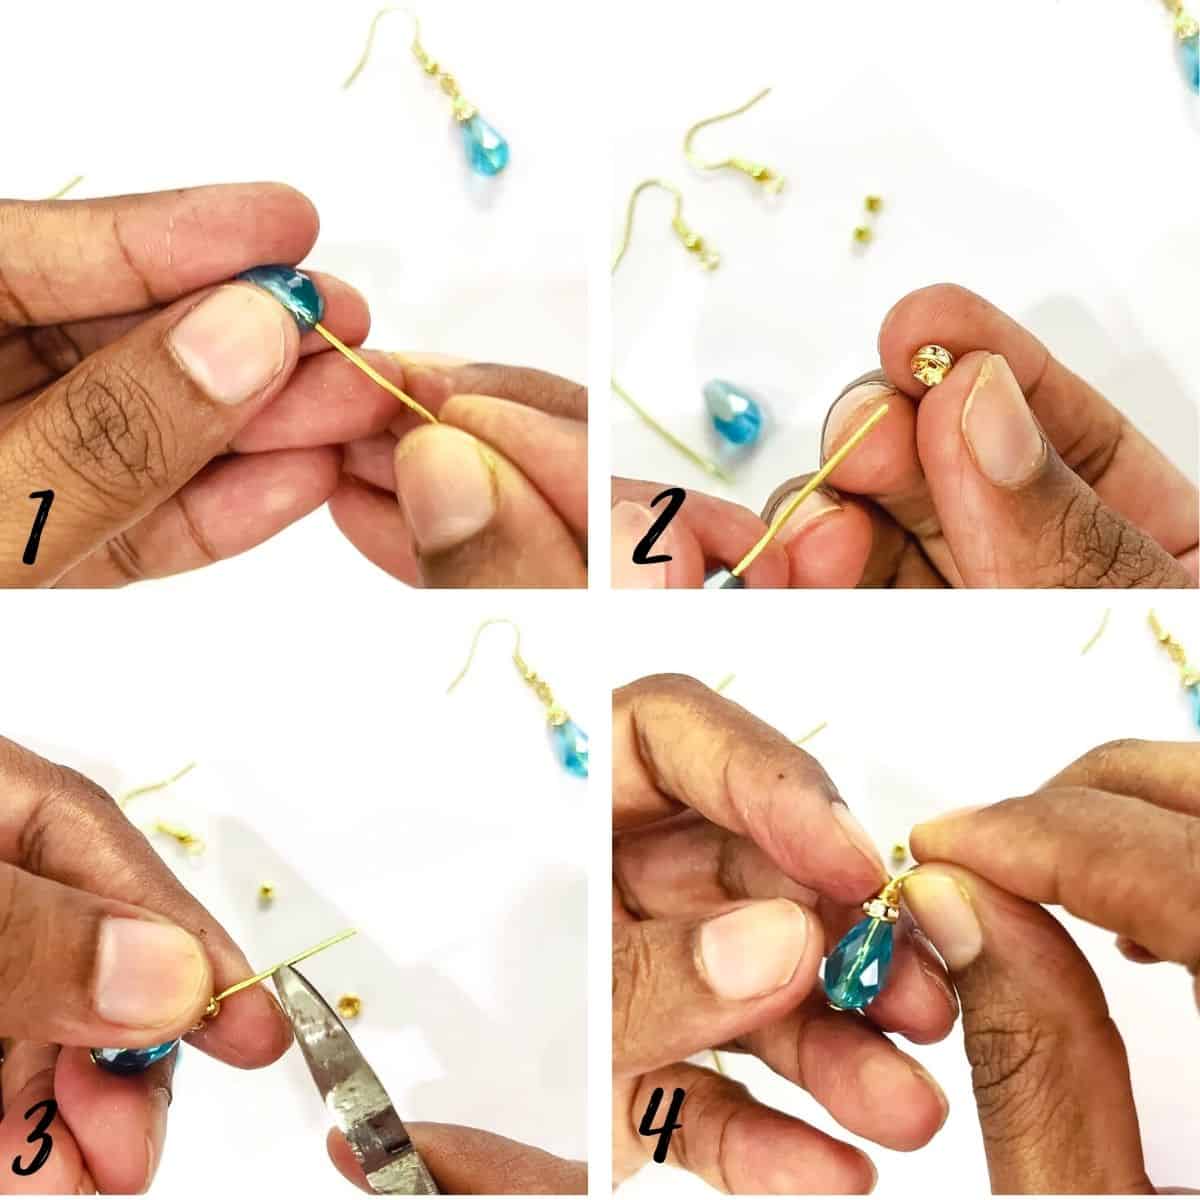 A poster of 4 images showing how to wire a teardrop bead, and 2 filler beads into a headpin.